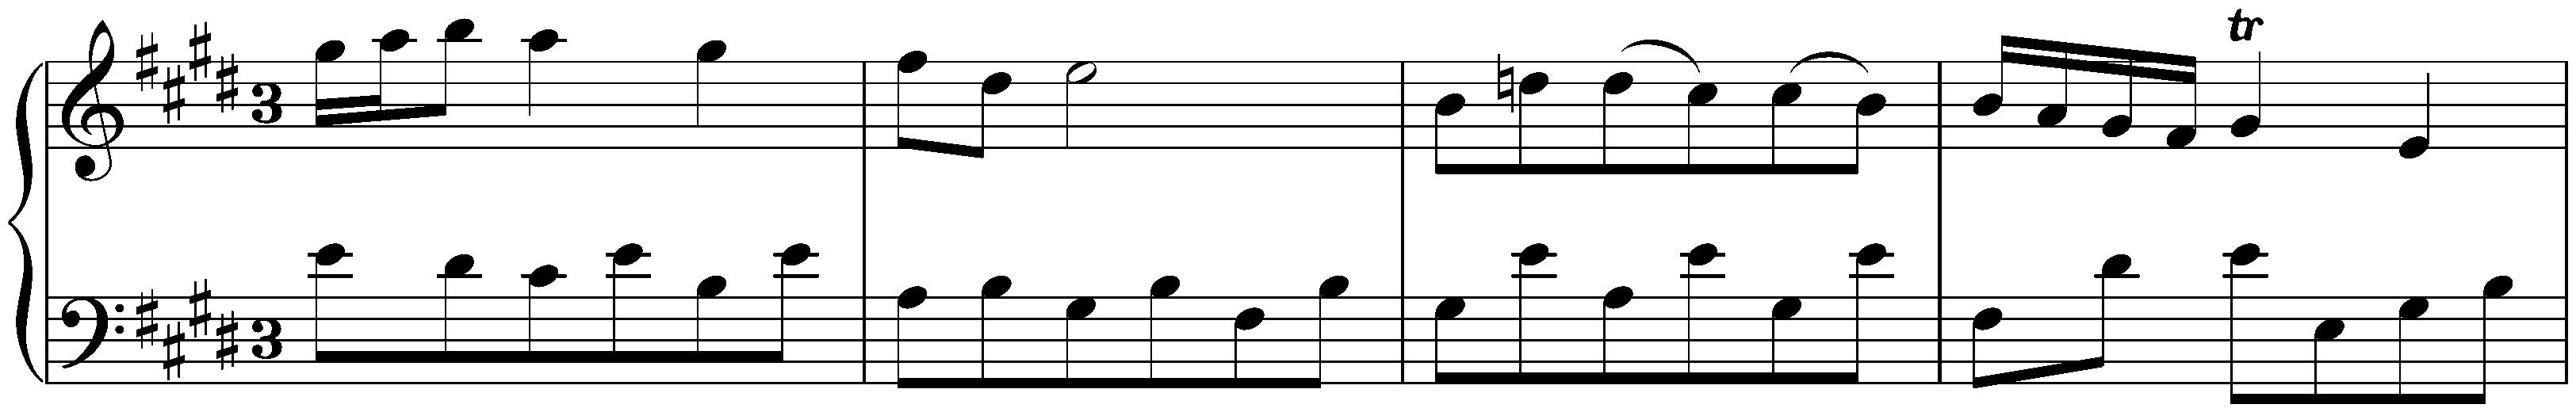 French Suite no. 6 in E major, BWV 817; 5. Polonaise